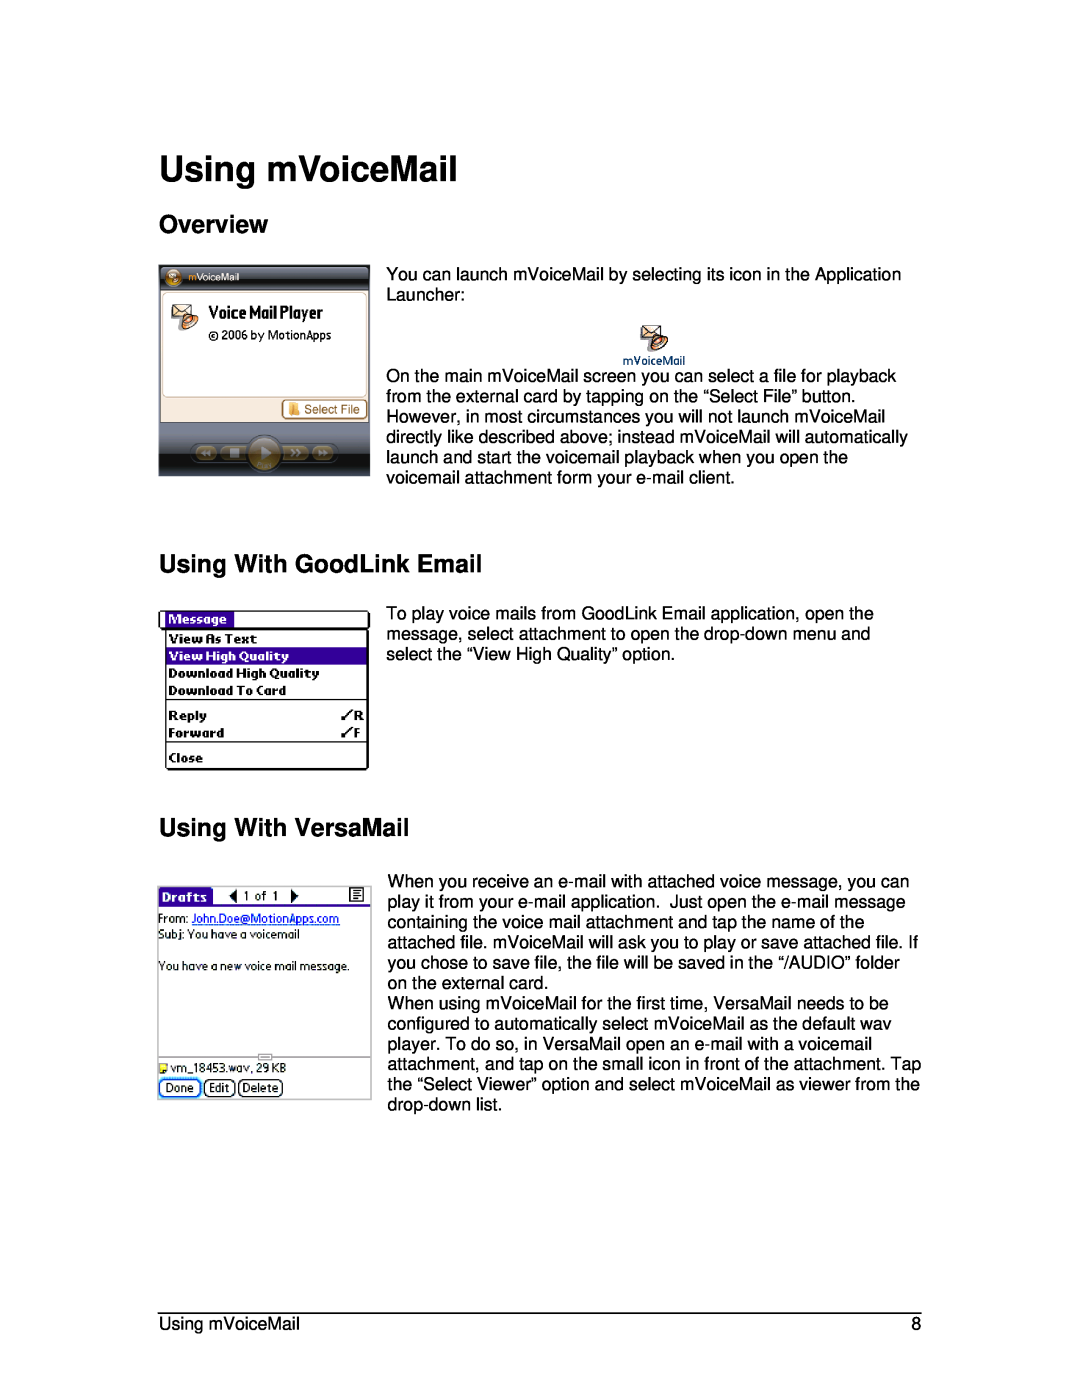 Motorola motorola user manual Using mVoiceMail, Overview, Using With GoodLink Email, Using With VersaMail 